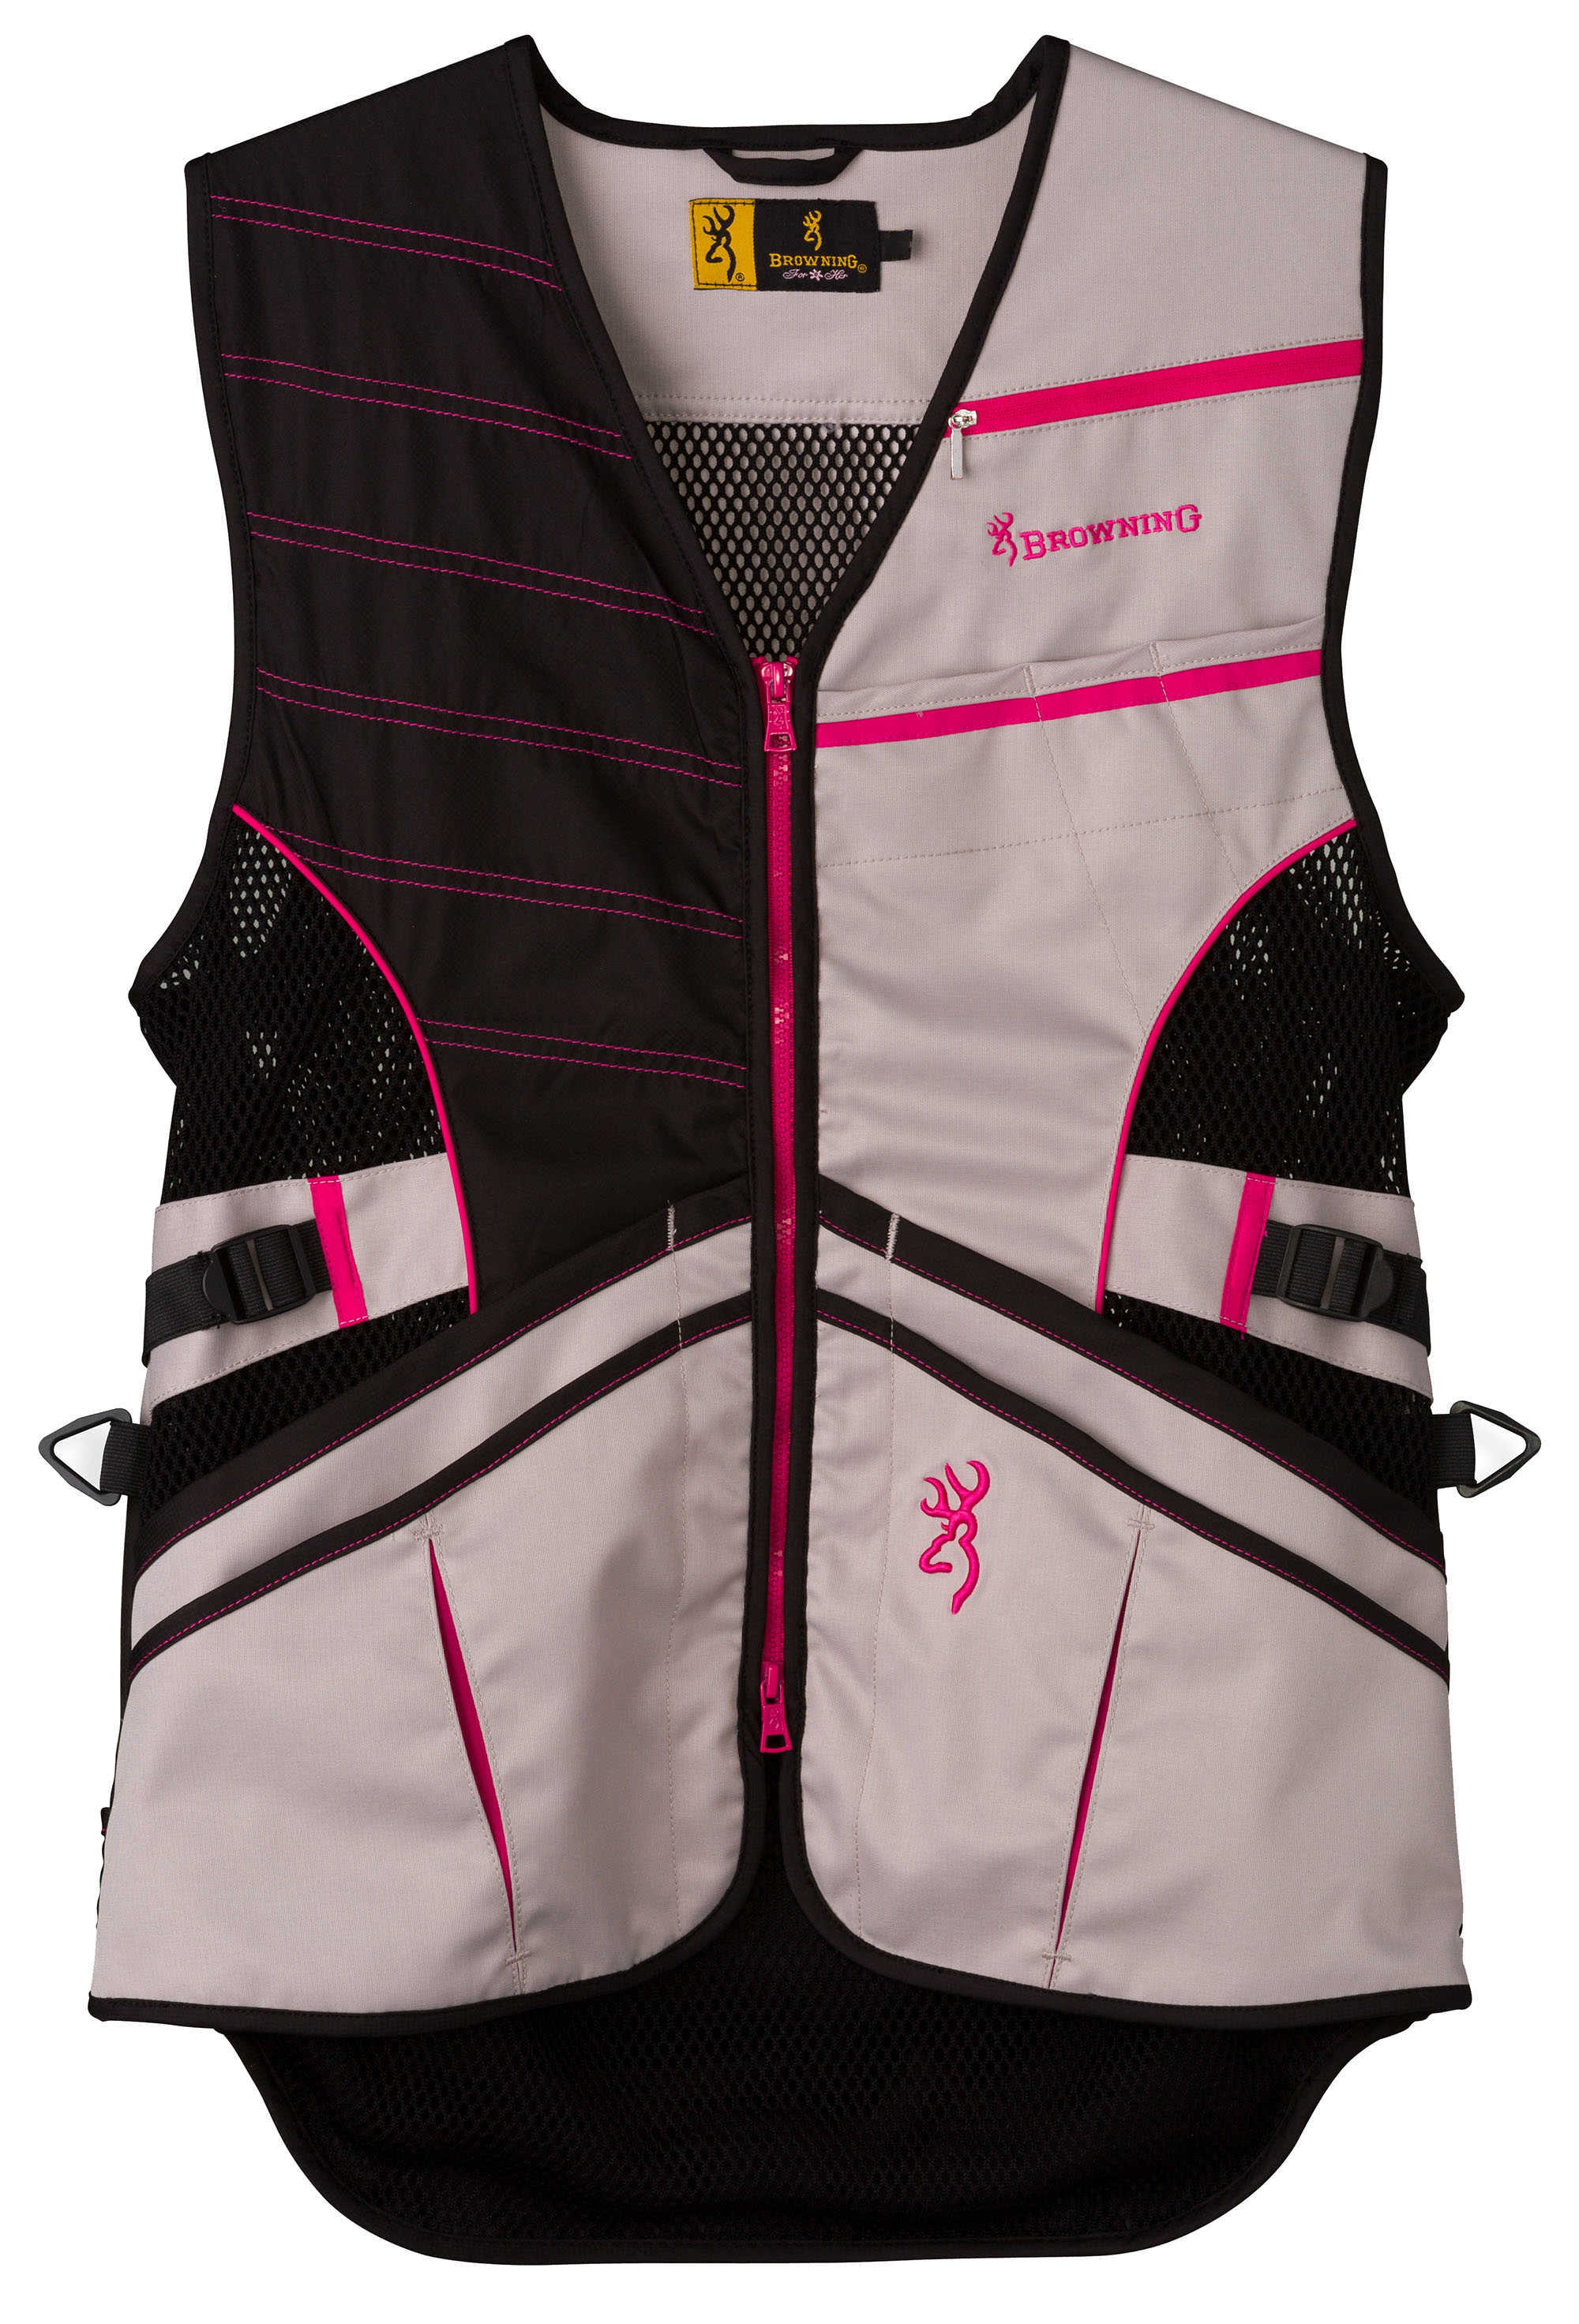 Browning Ace Shooting Vest Hot Pink, X-Large Md: 3050727704